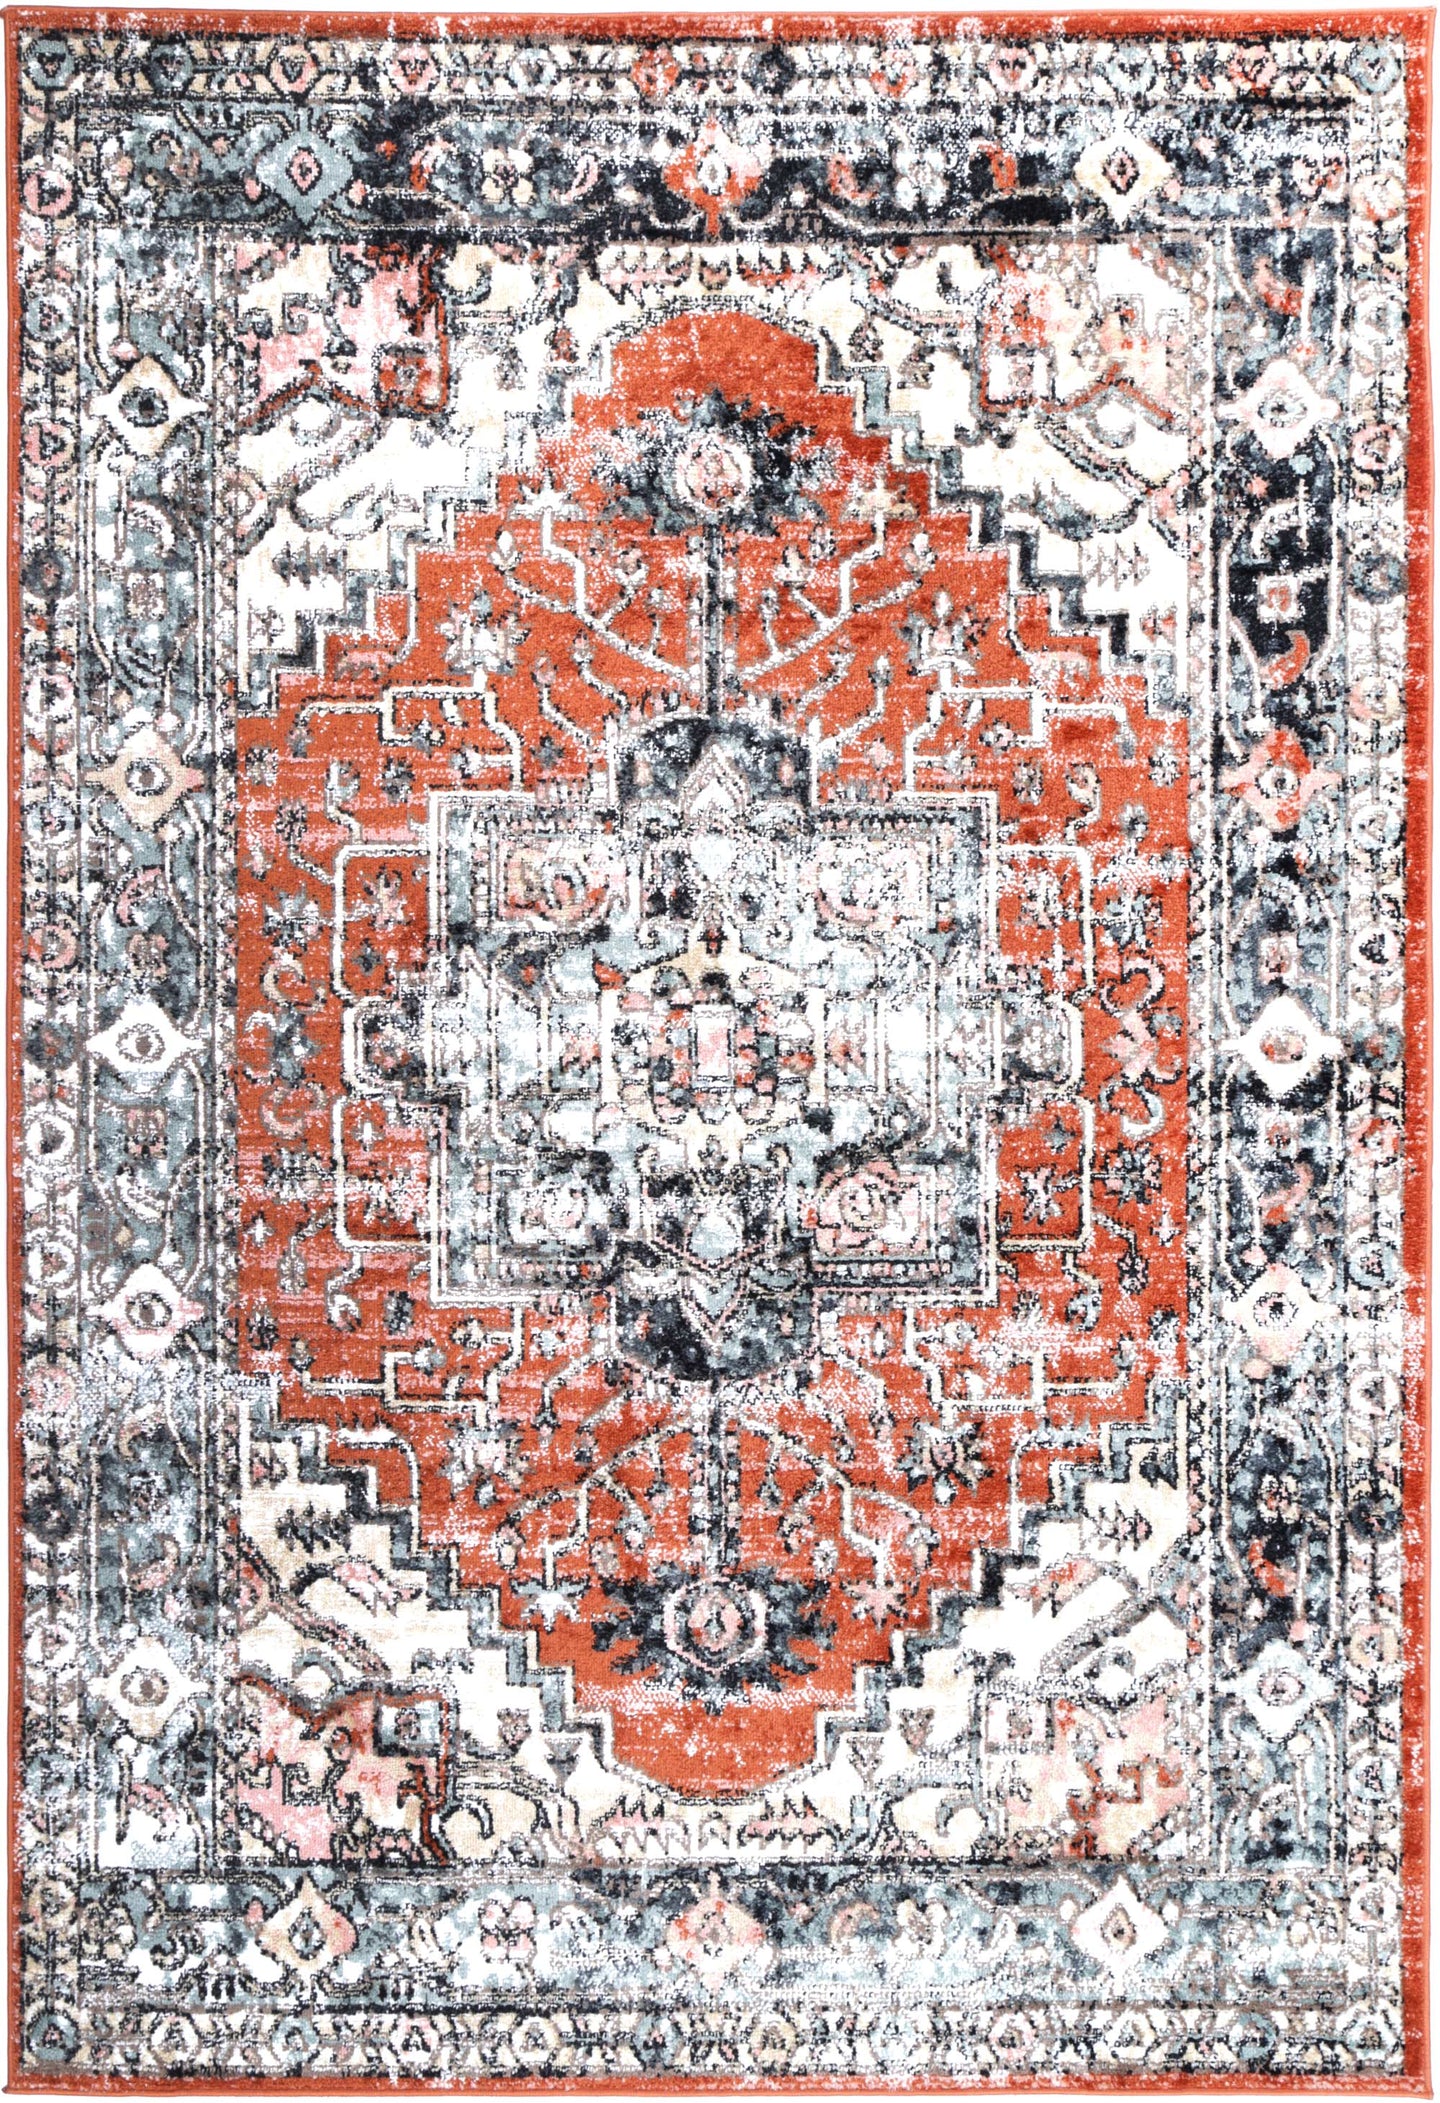 Florence Traditional Terracotta Rug freeshipping - Rug Empire